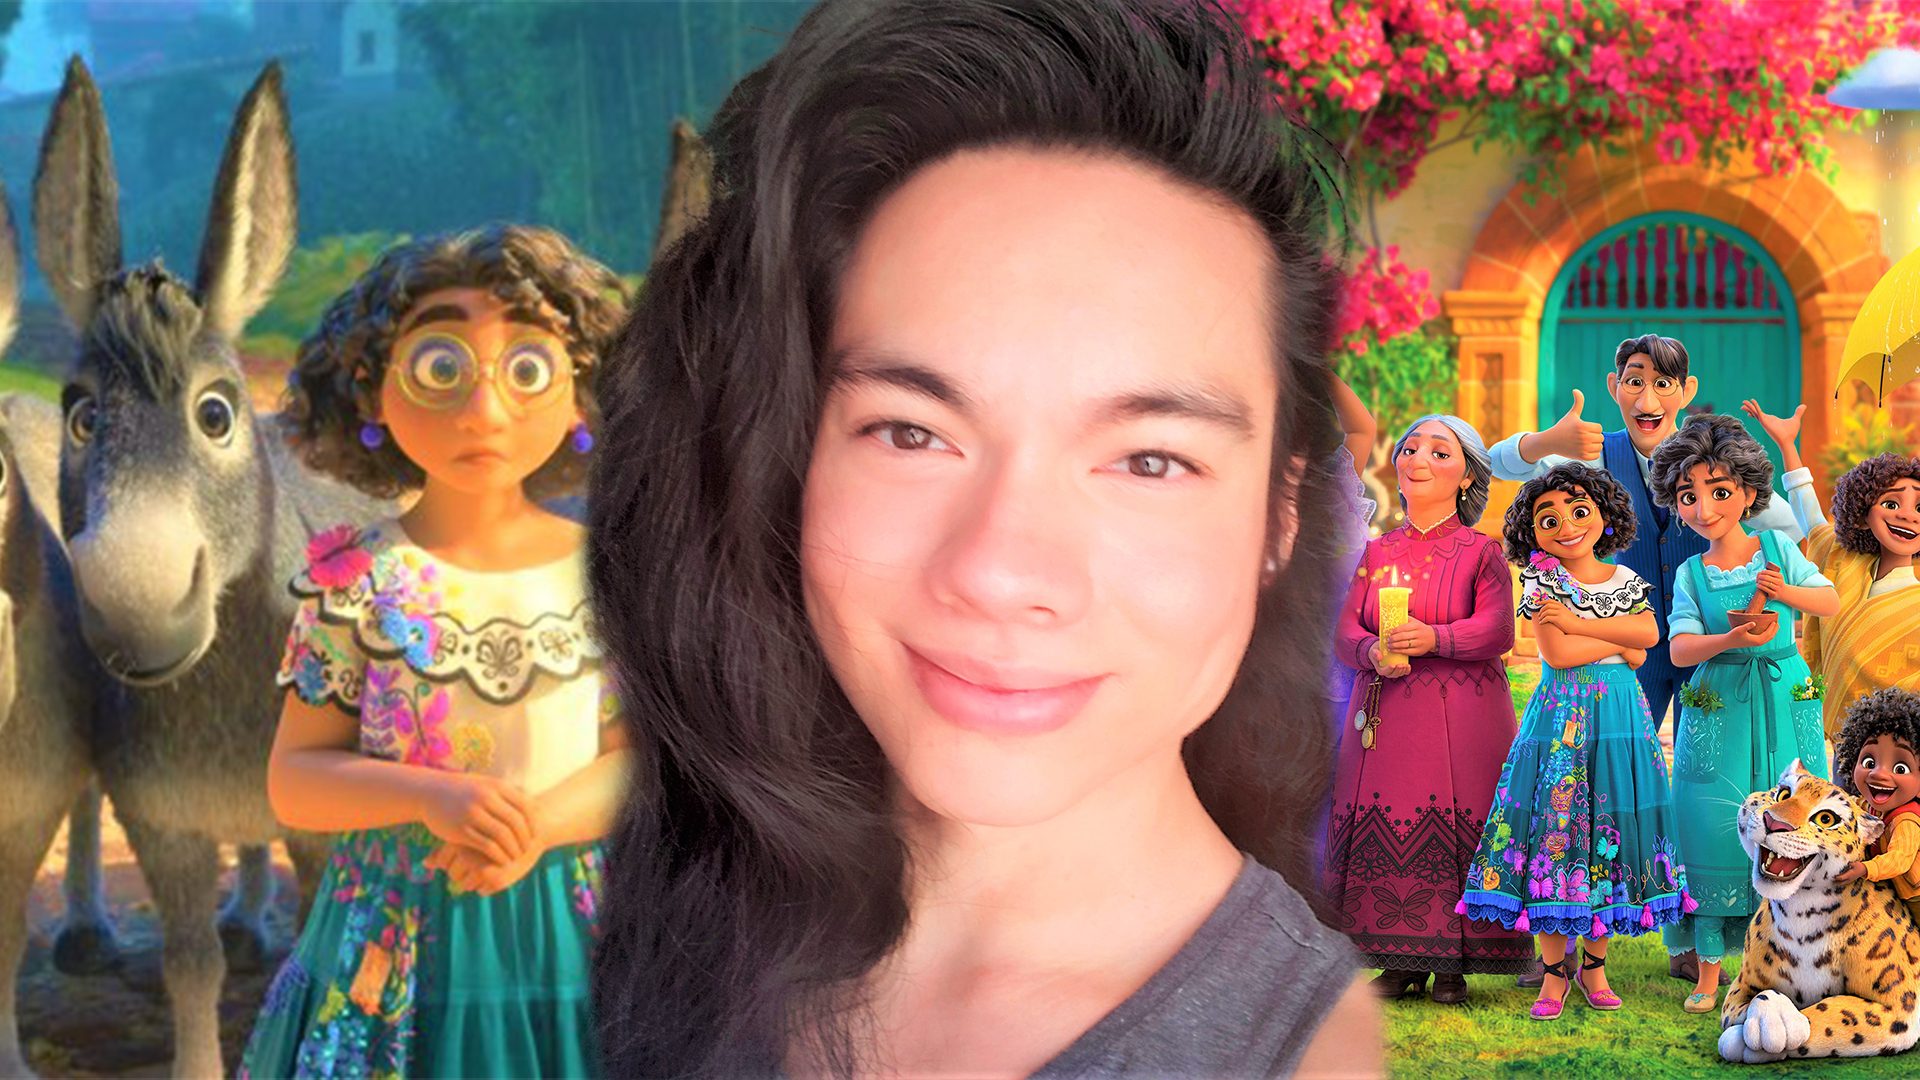 [Only IN Hollywood] Fil-Am animator on working on 2 Golden Globe-nominated Disney films